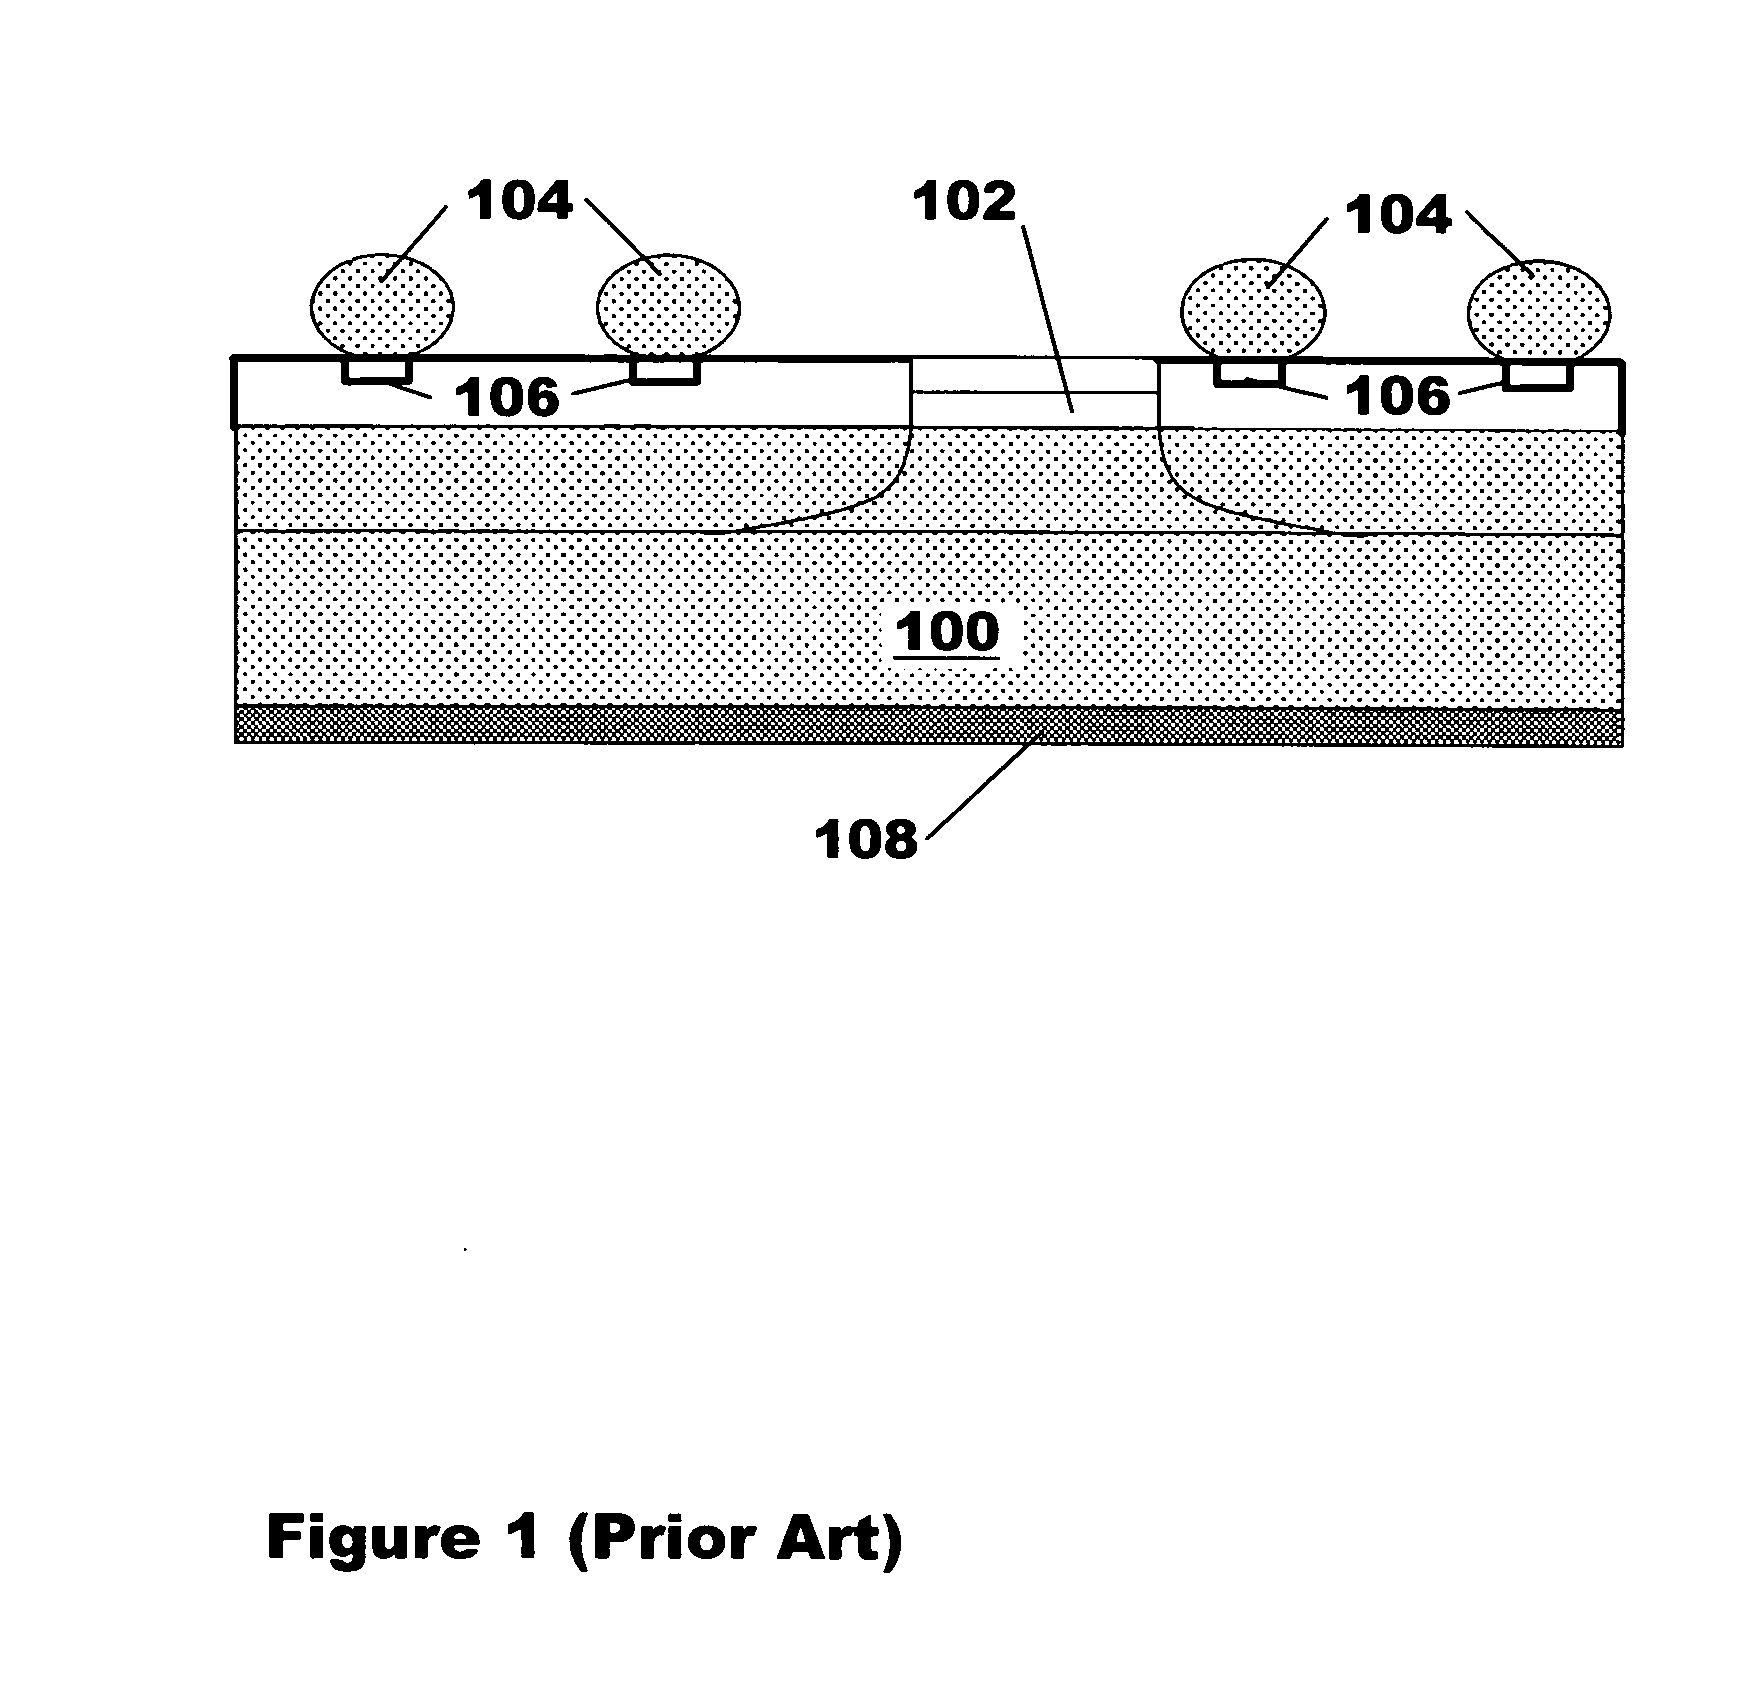 System and method using self-assembled nano structures in the design and fabrication of an integrated circuit micro-cooler